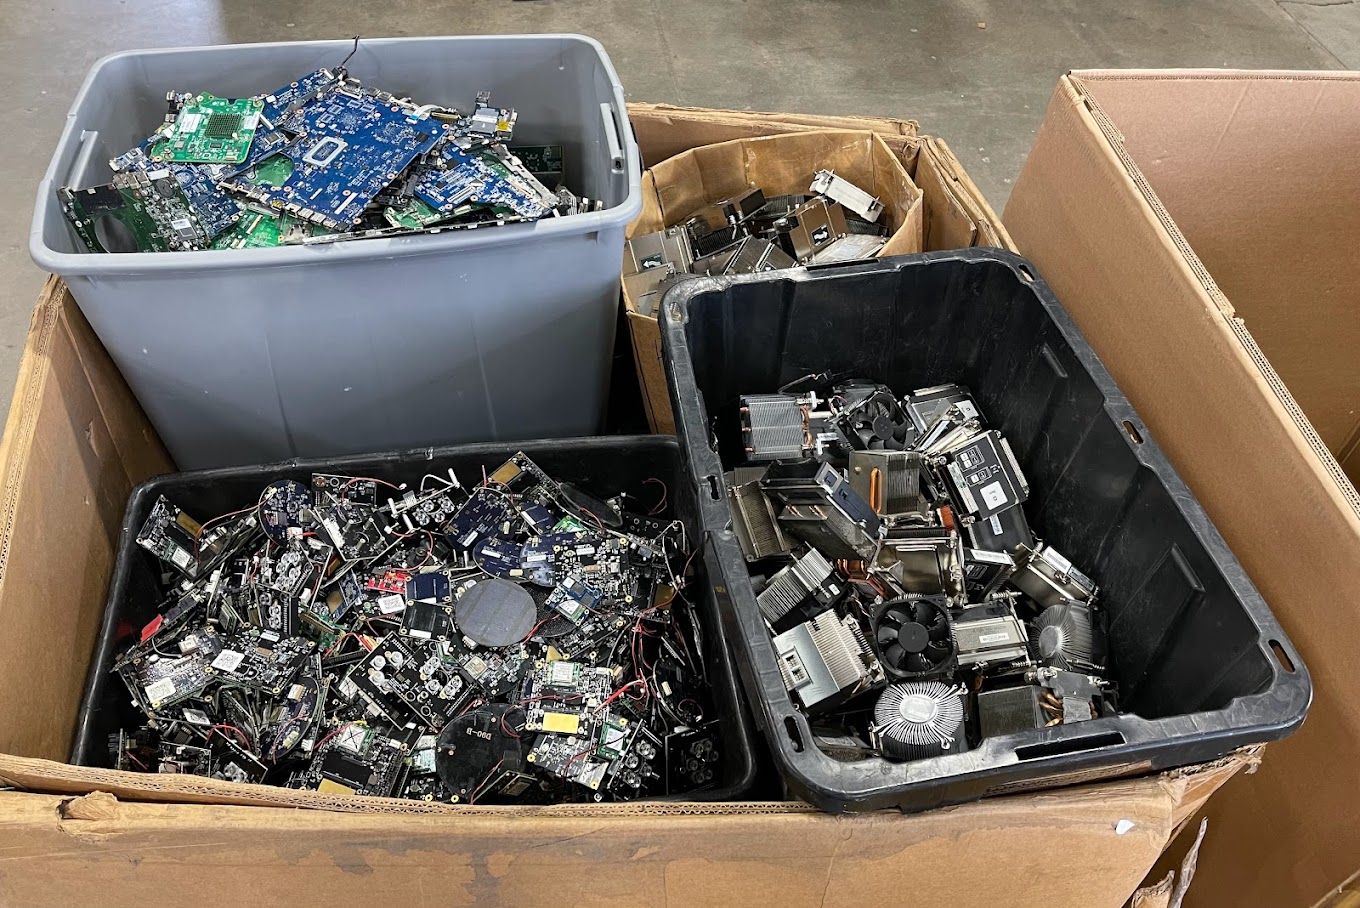 Cumming's eco-friendly approach to electronic recycling, offering services in the disposal of electronics and IT equipment, with a focus on sustainable practices.